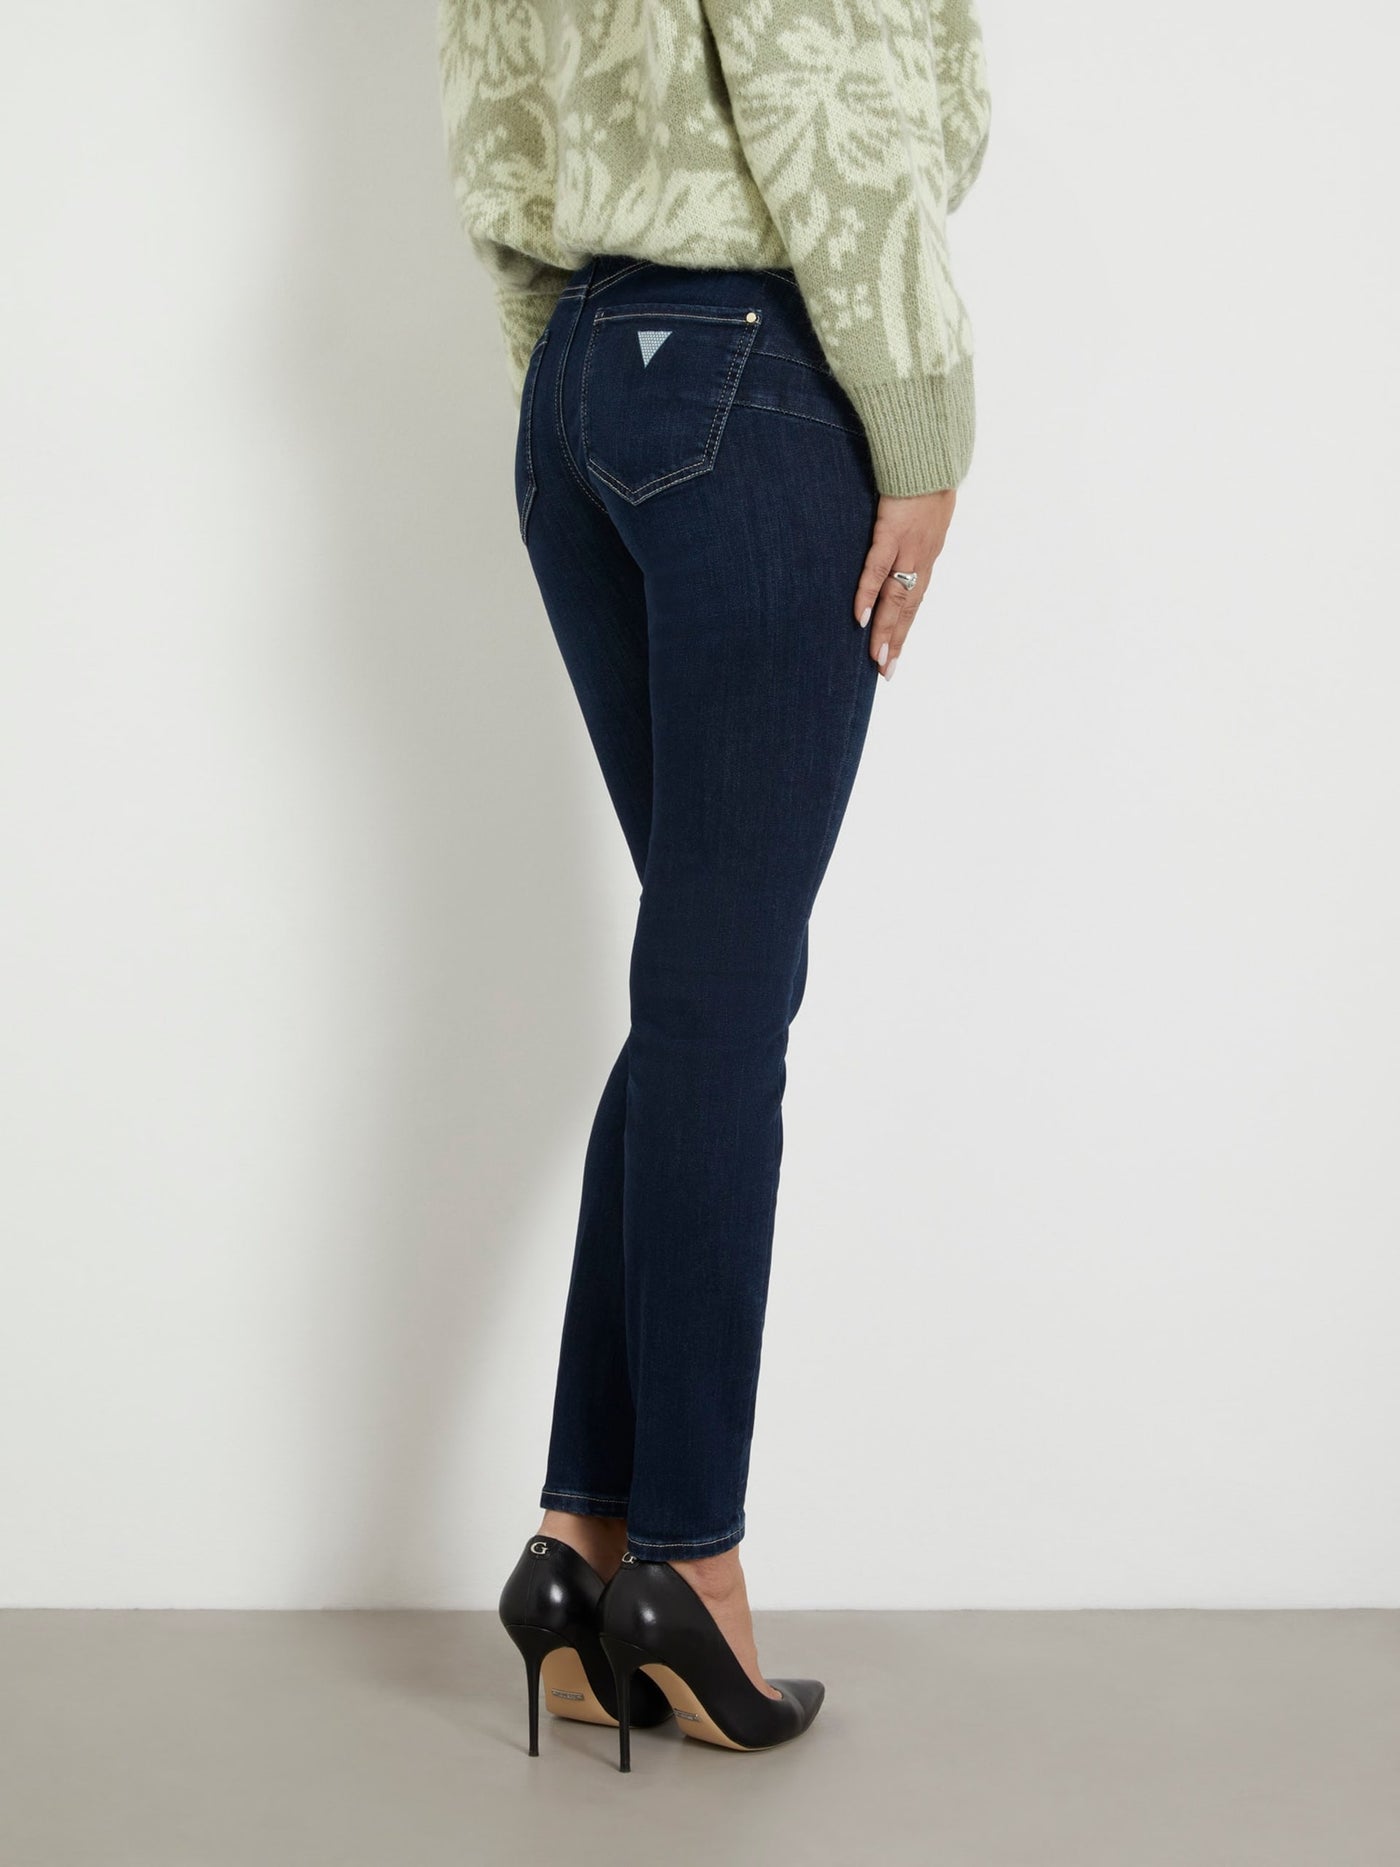 Guess - Jeans skinny shape up Blu scuro